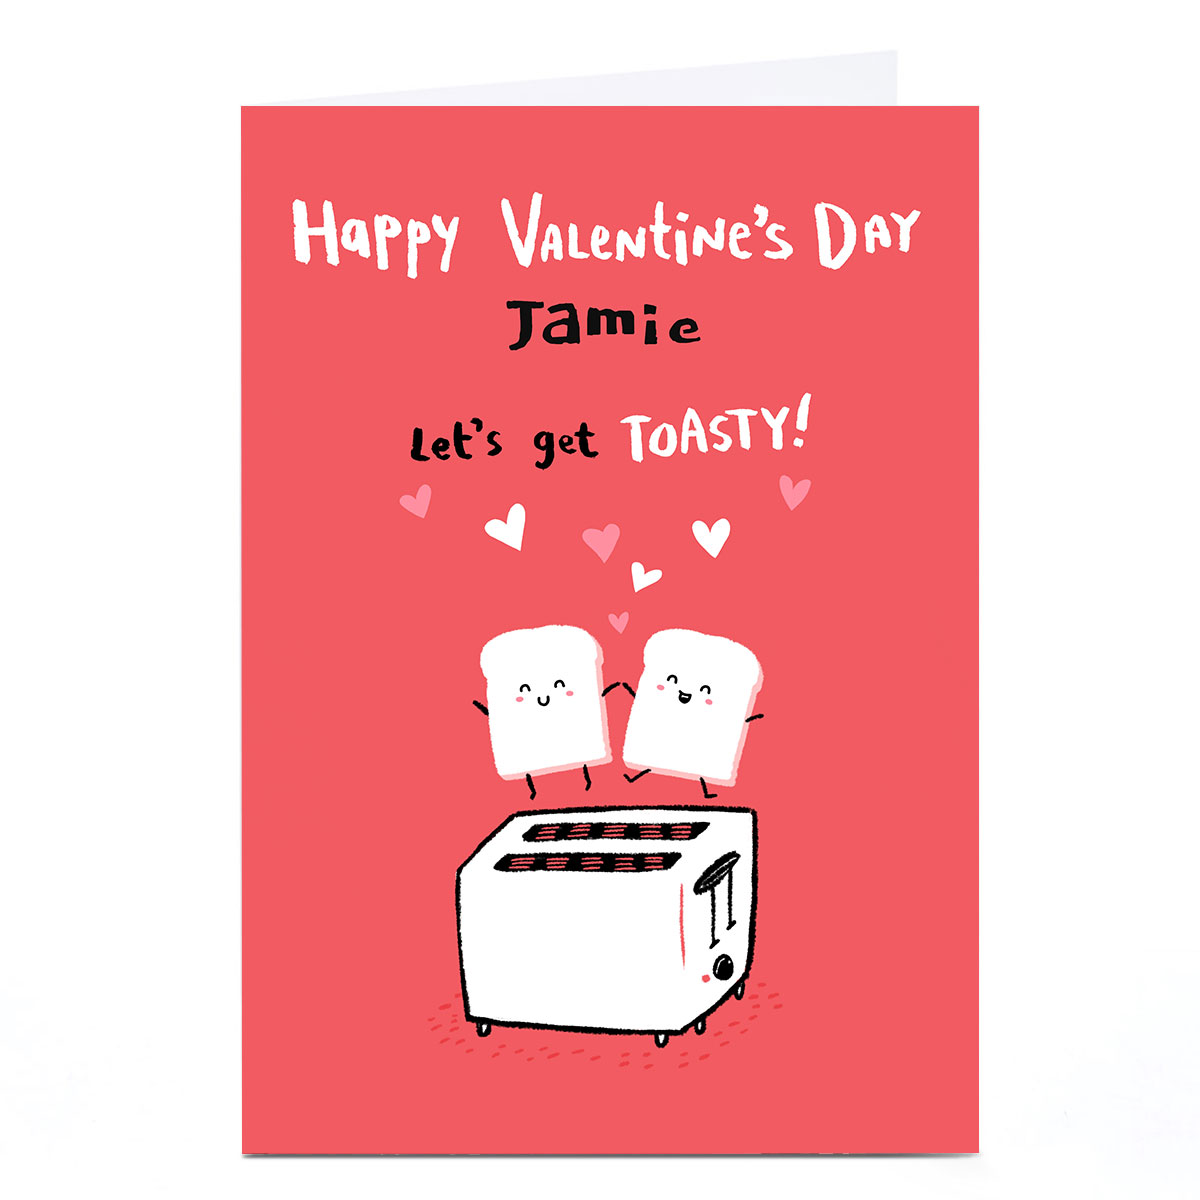 Personalised Hew Ma Valentine's Day Card - Toasty!